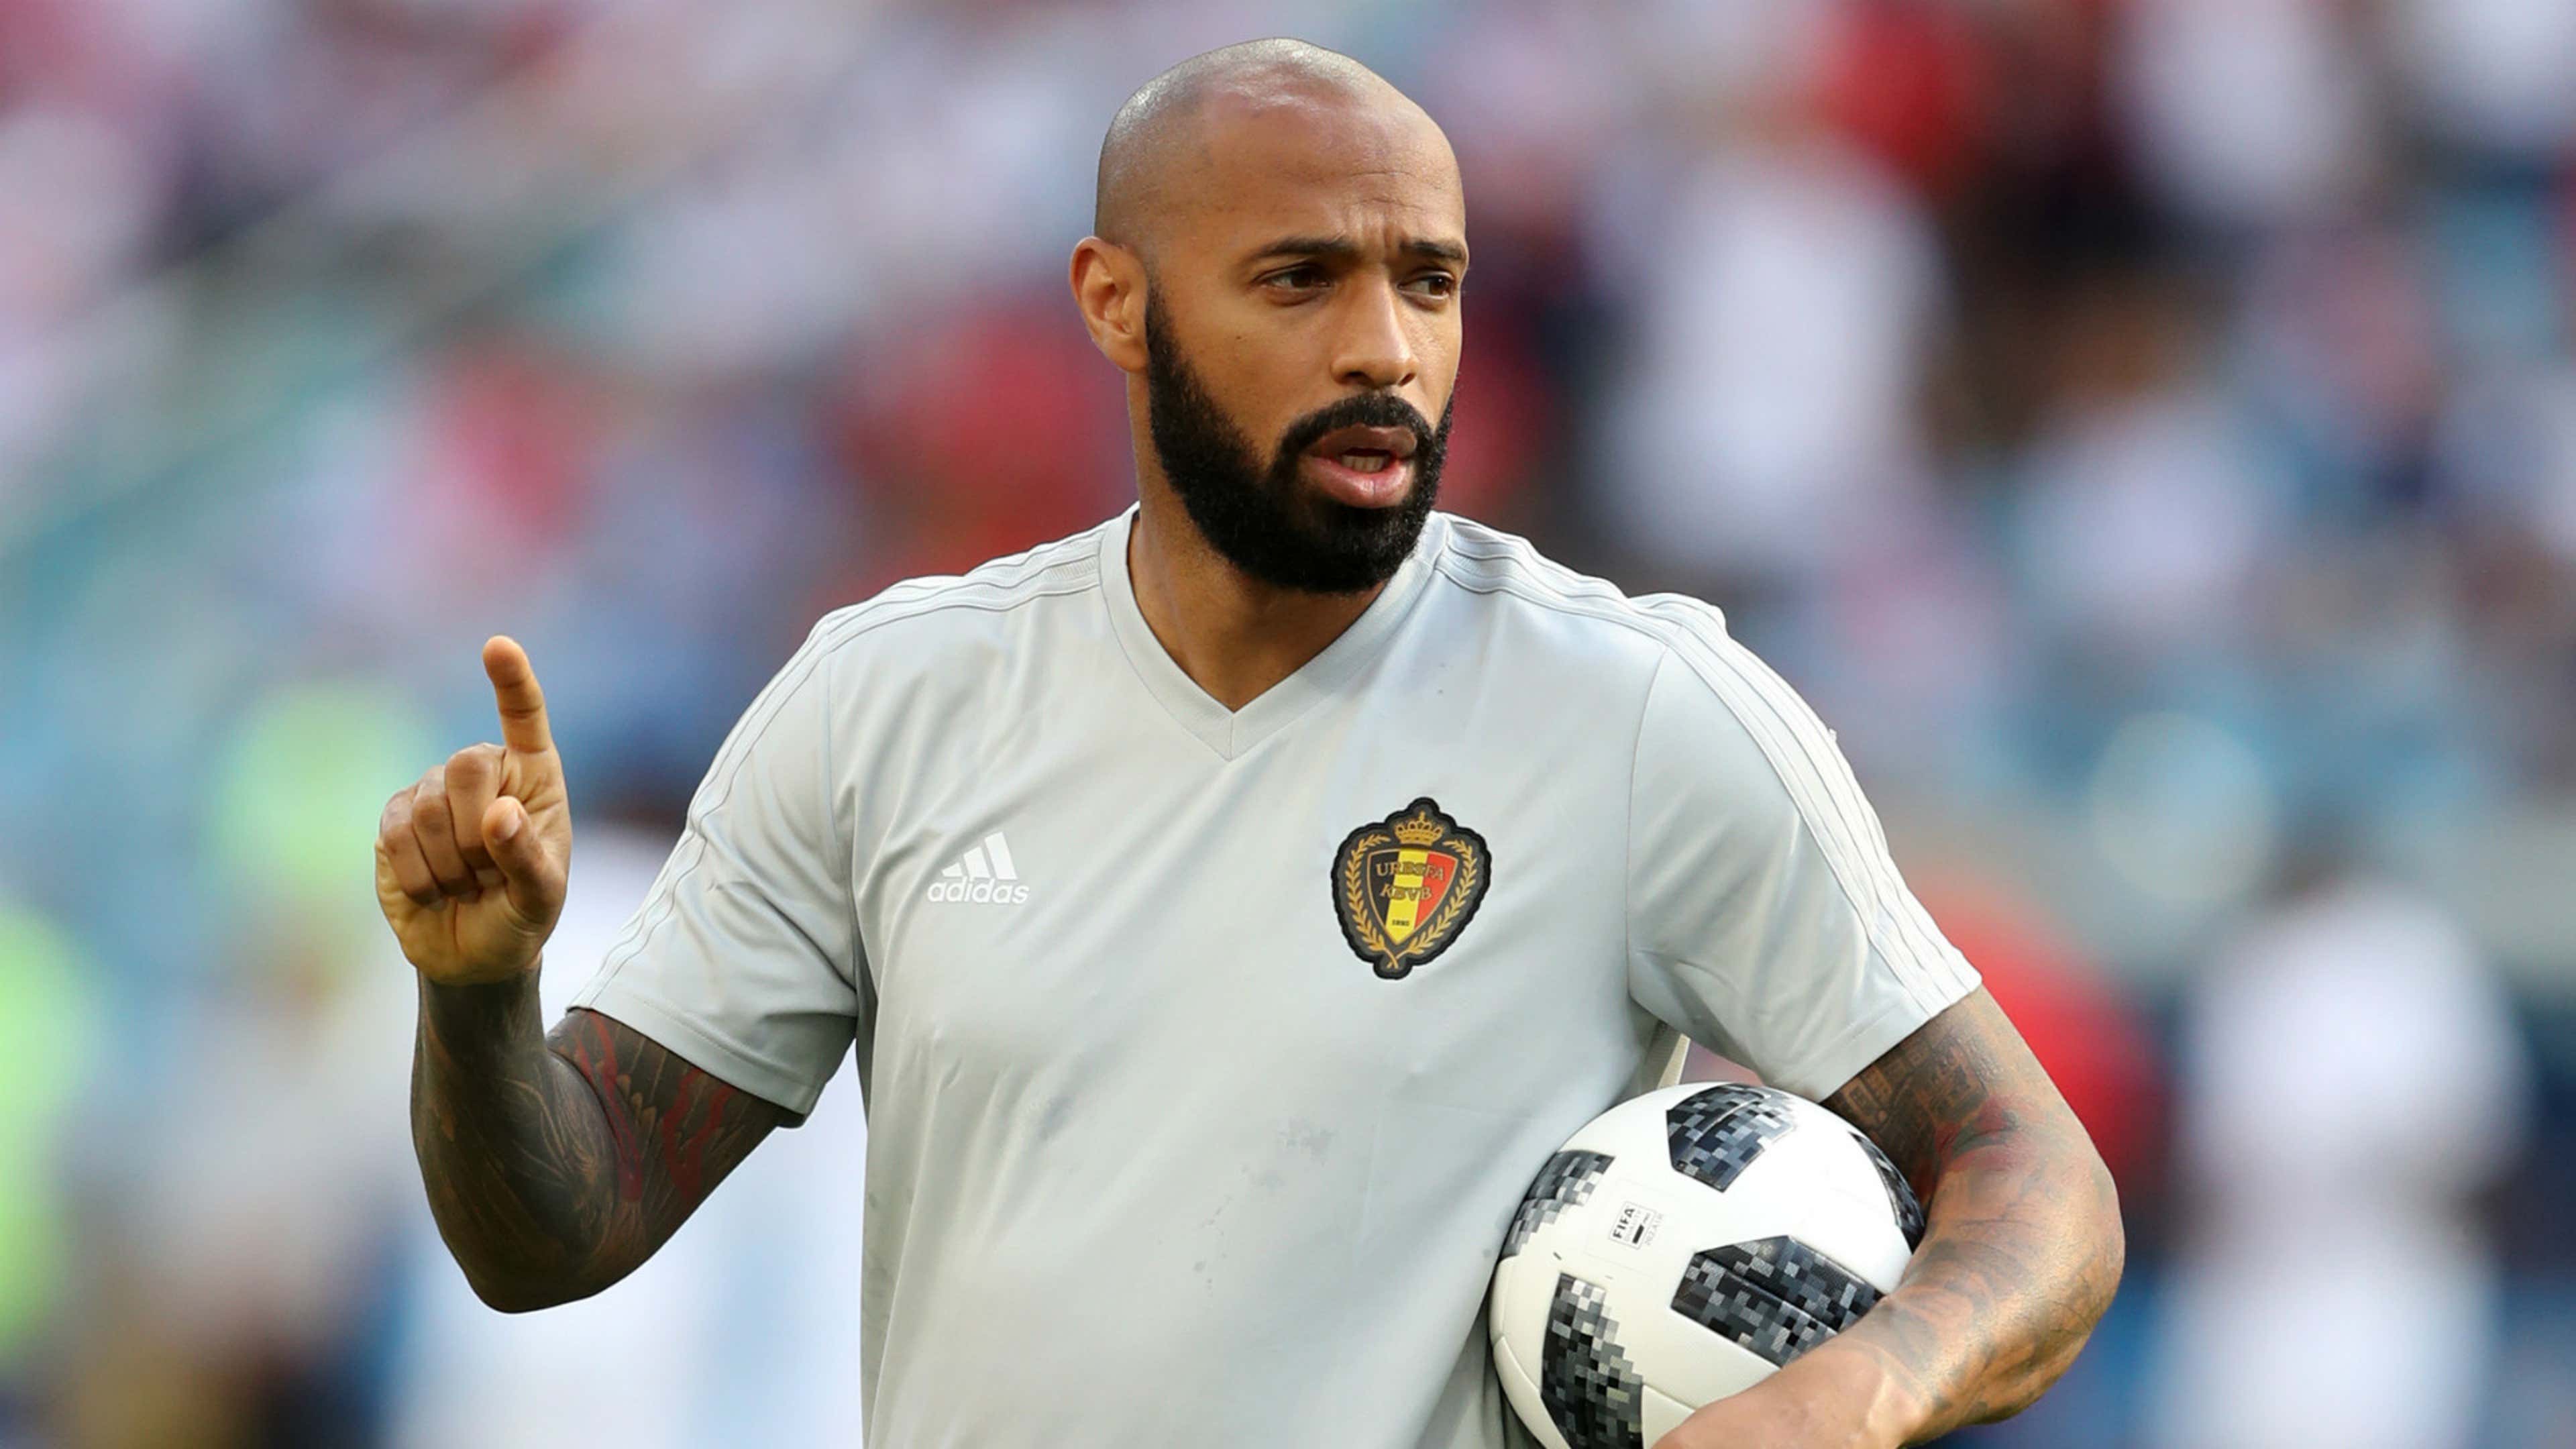 Thierry Henry's five changes for the future of football